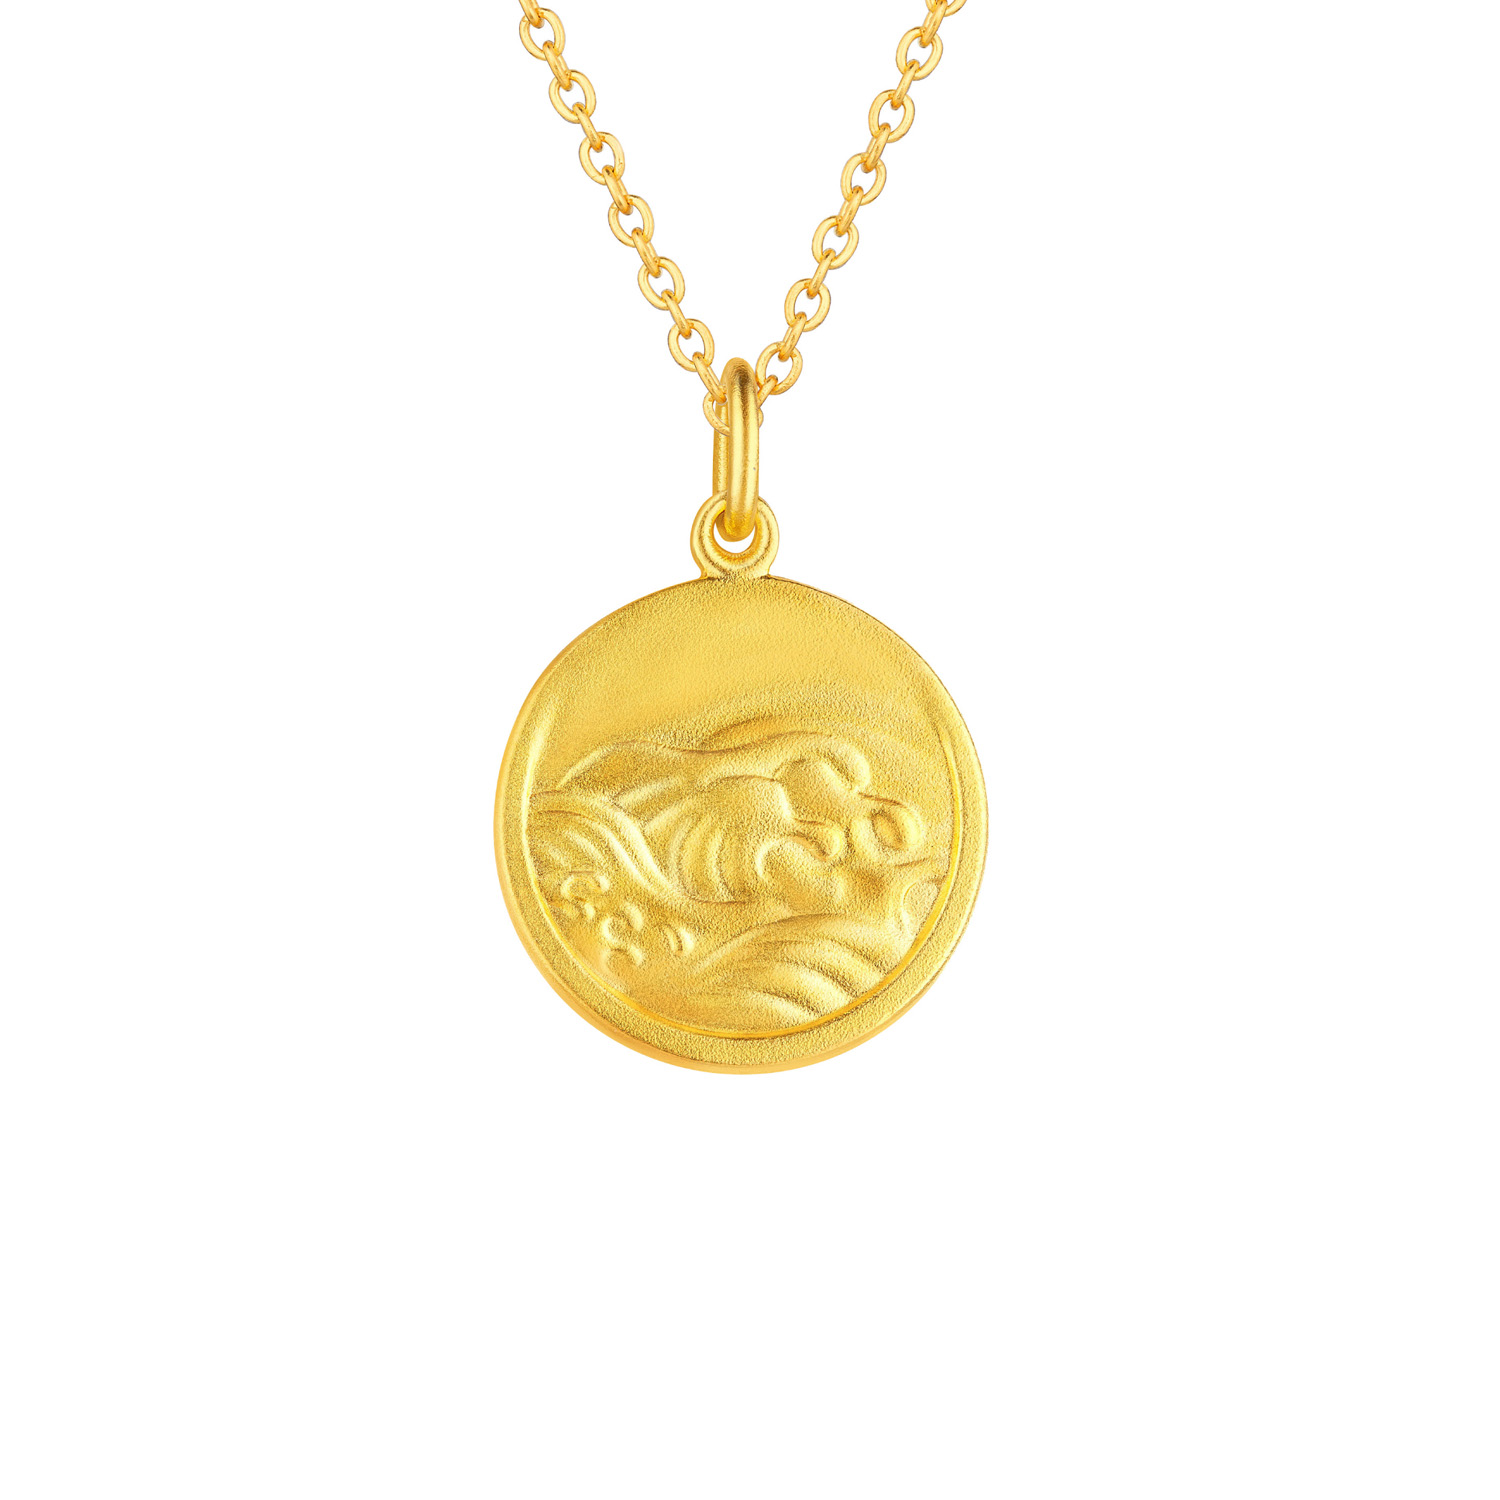 Heirloom Fortune - Charm of Song Dynasty Collection "Landscape" Gold Pendant 